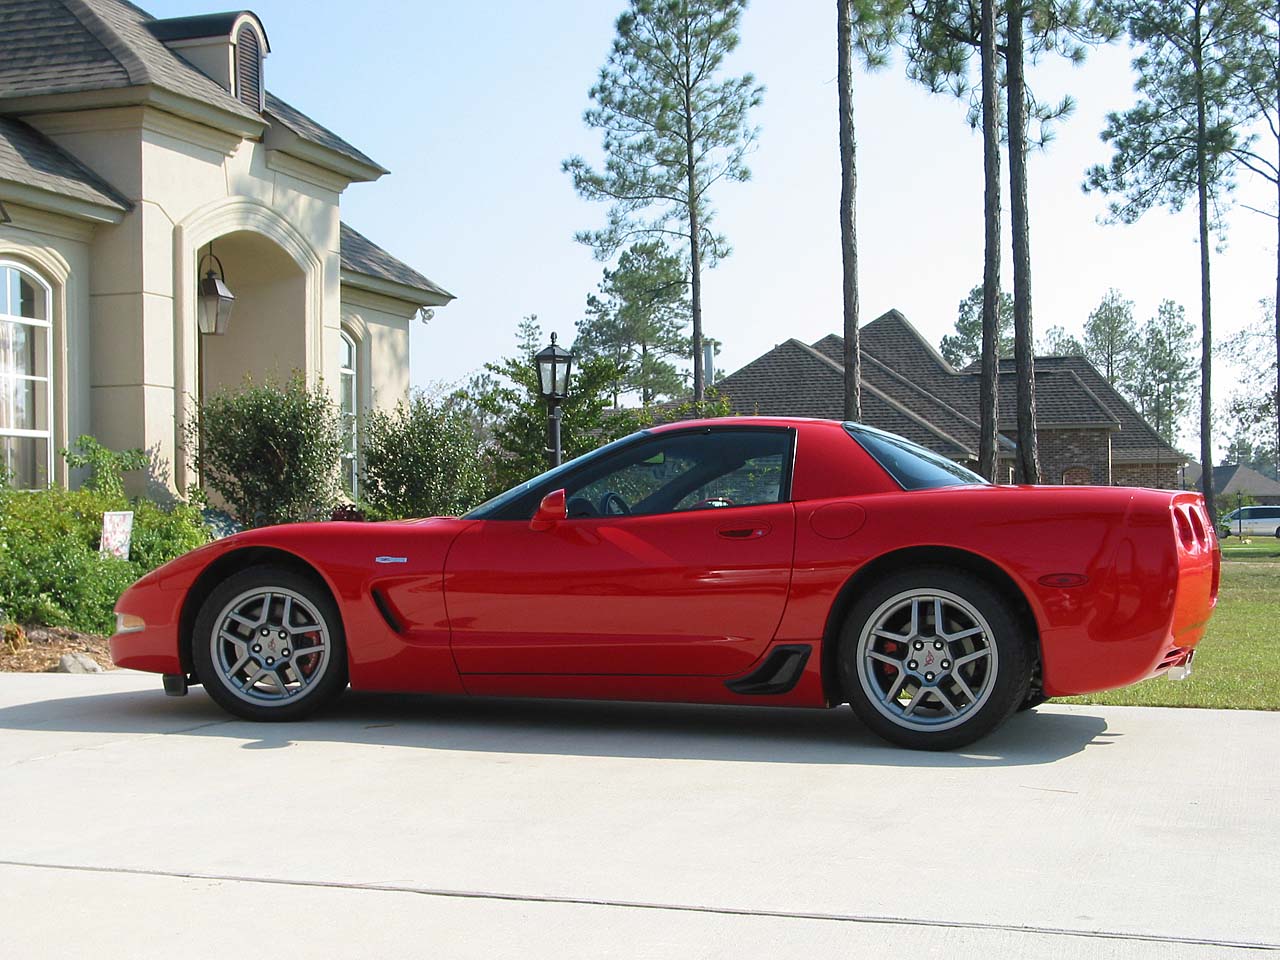 Torch Red, the proper color for any C5 Corvette